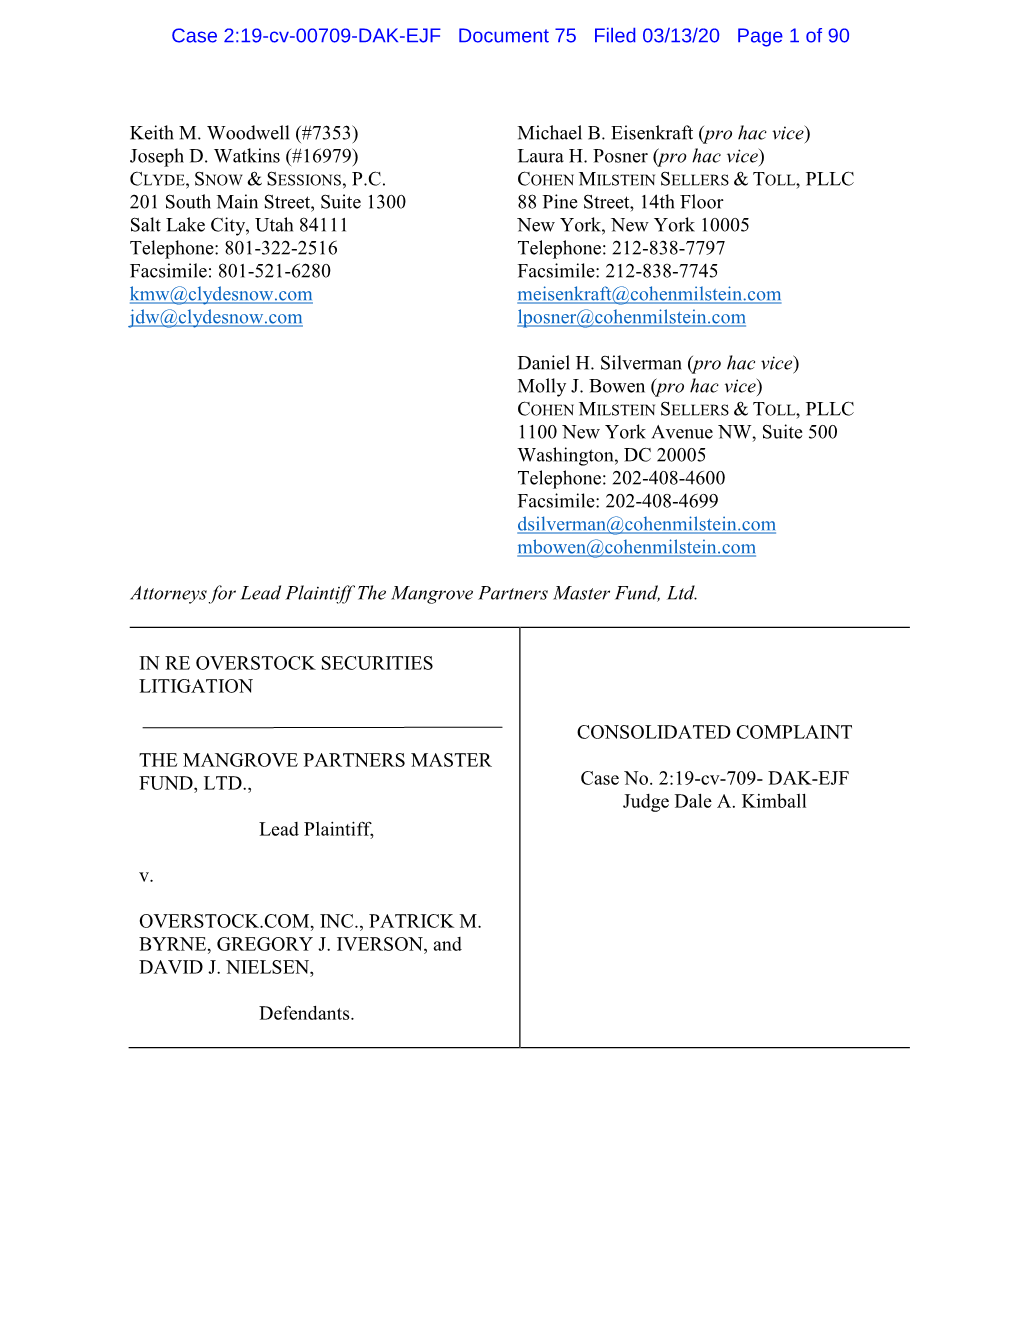 CONSOLIDATED COMPLAINT the MANGROVE PARTNERS MASTER FUND, LTD., Case No